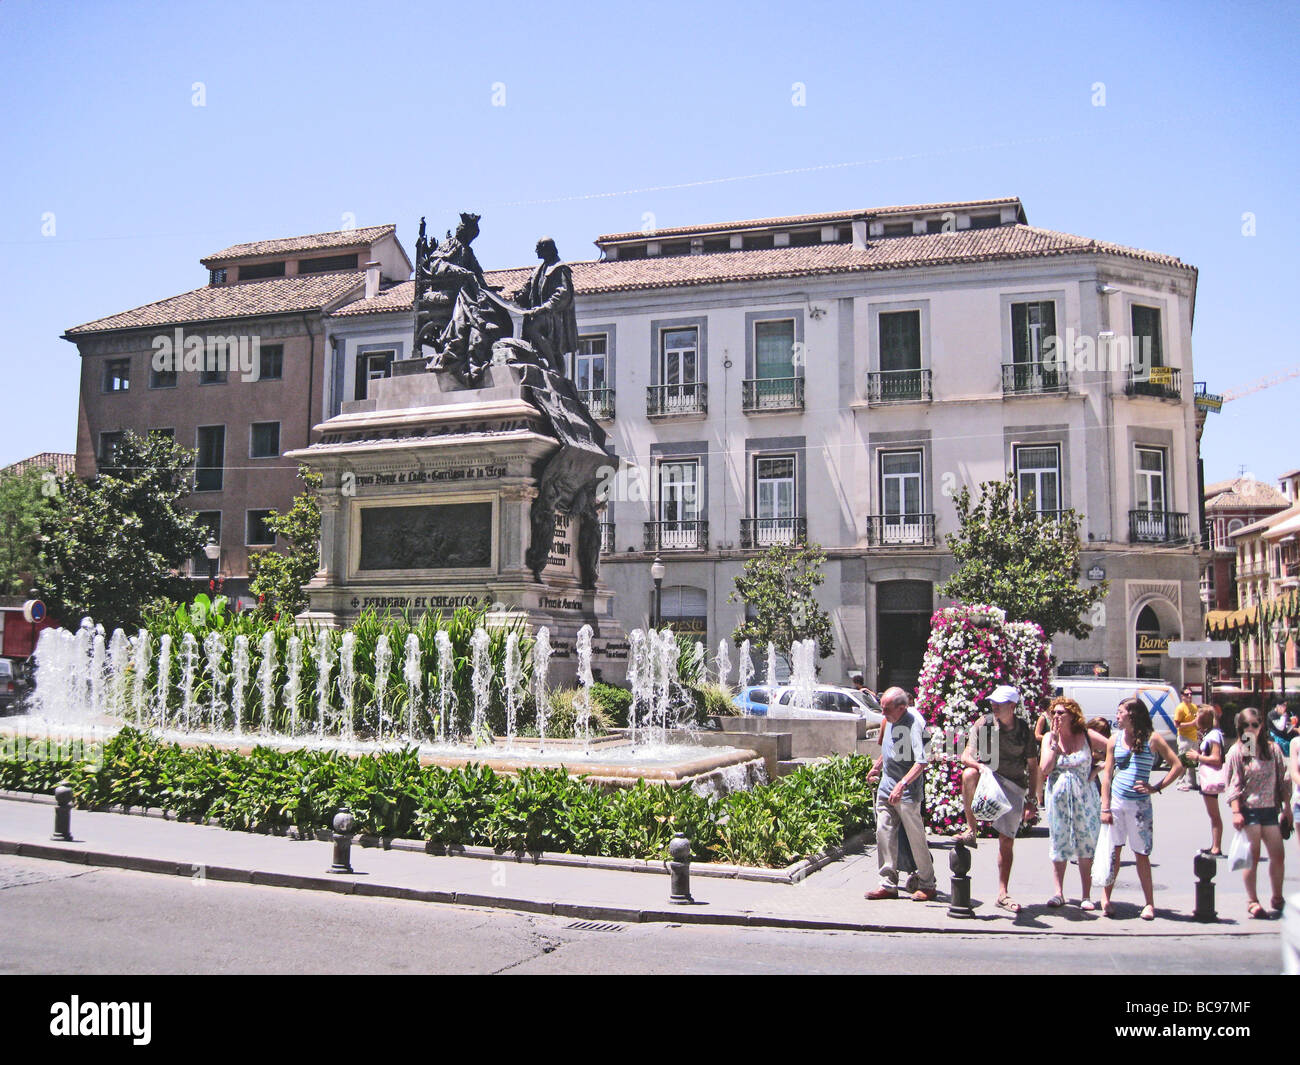 GRANADA, Spain. Statue of Queen Isabella and Columbus in the Plaza Isabel Catolica Stock Photo